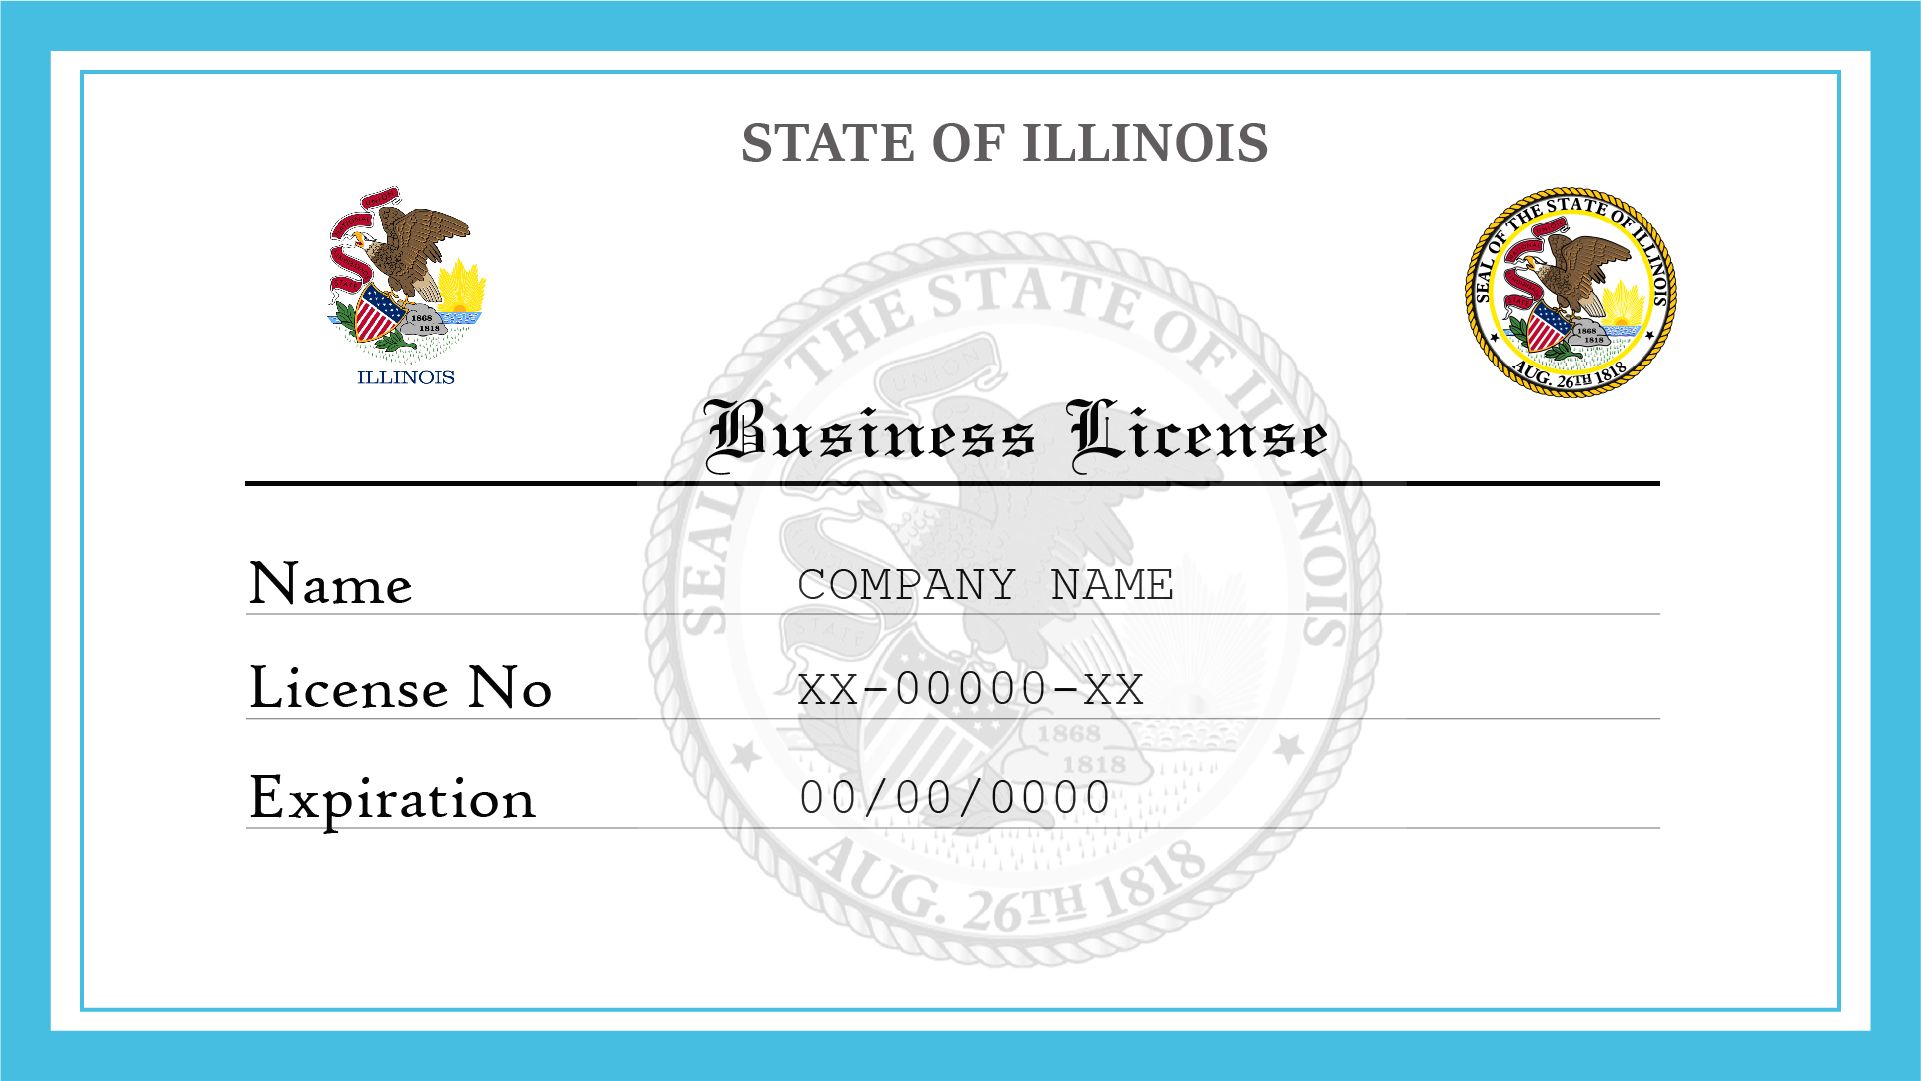 Illinois Business License License Lookup